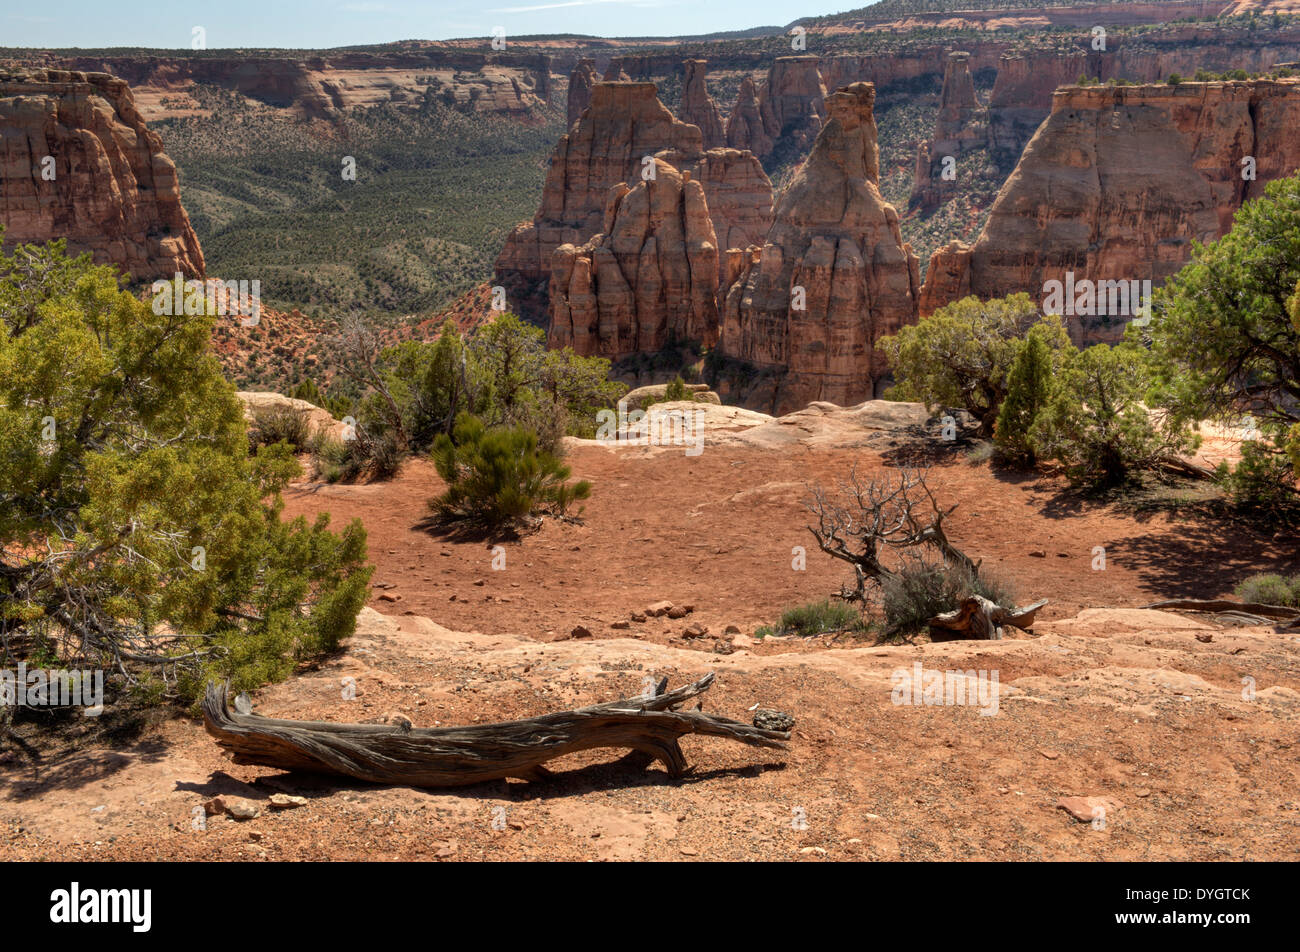 Monoliths (monuments) in the Colorado National Monument. Stock Photo